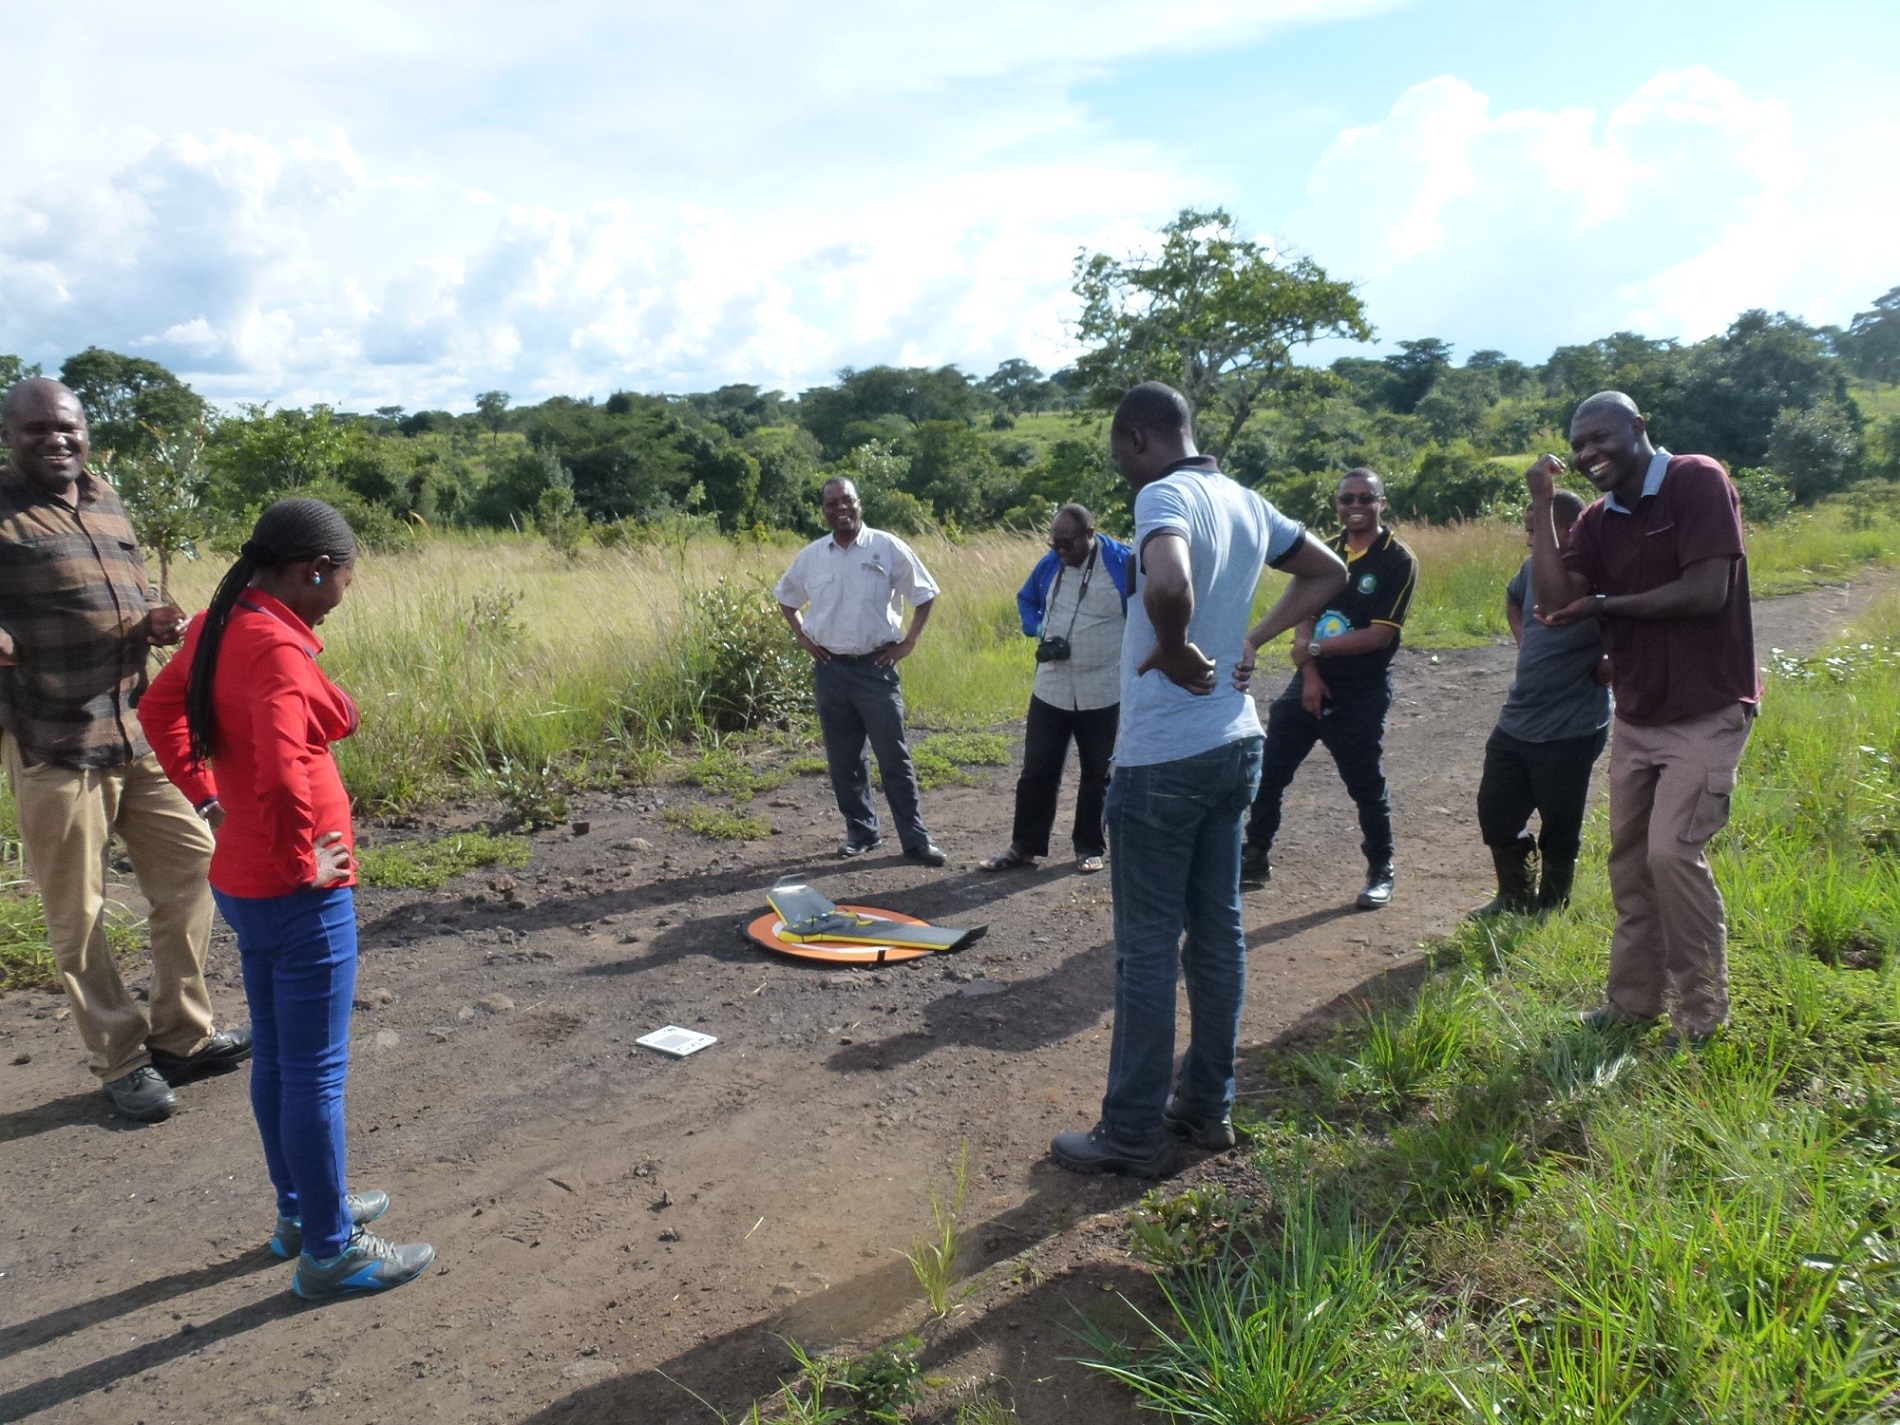 Students from University of Zambia gathering around the drone before the first flight back in 2018